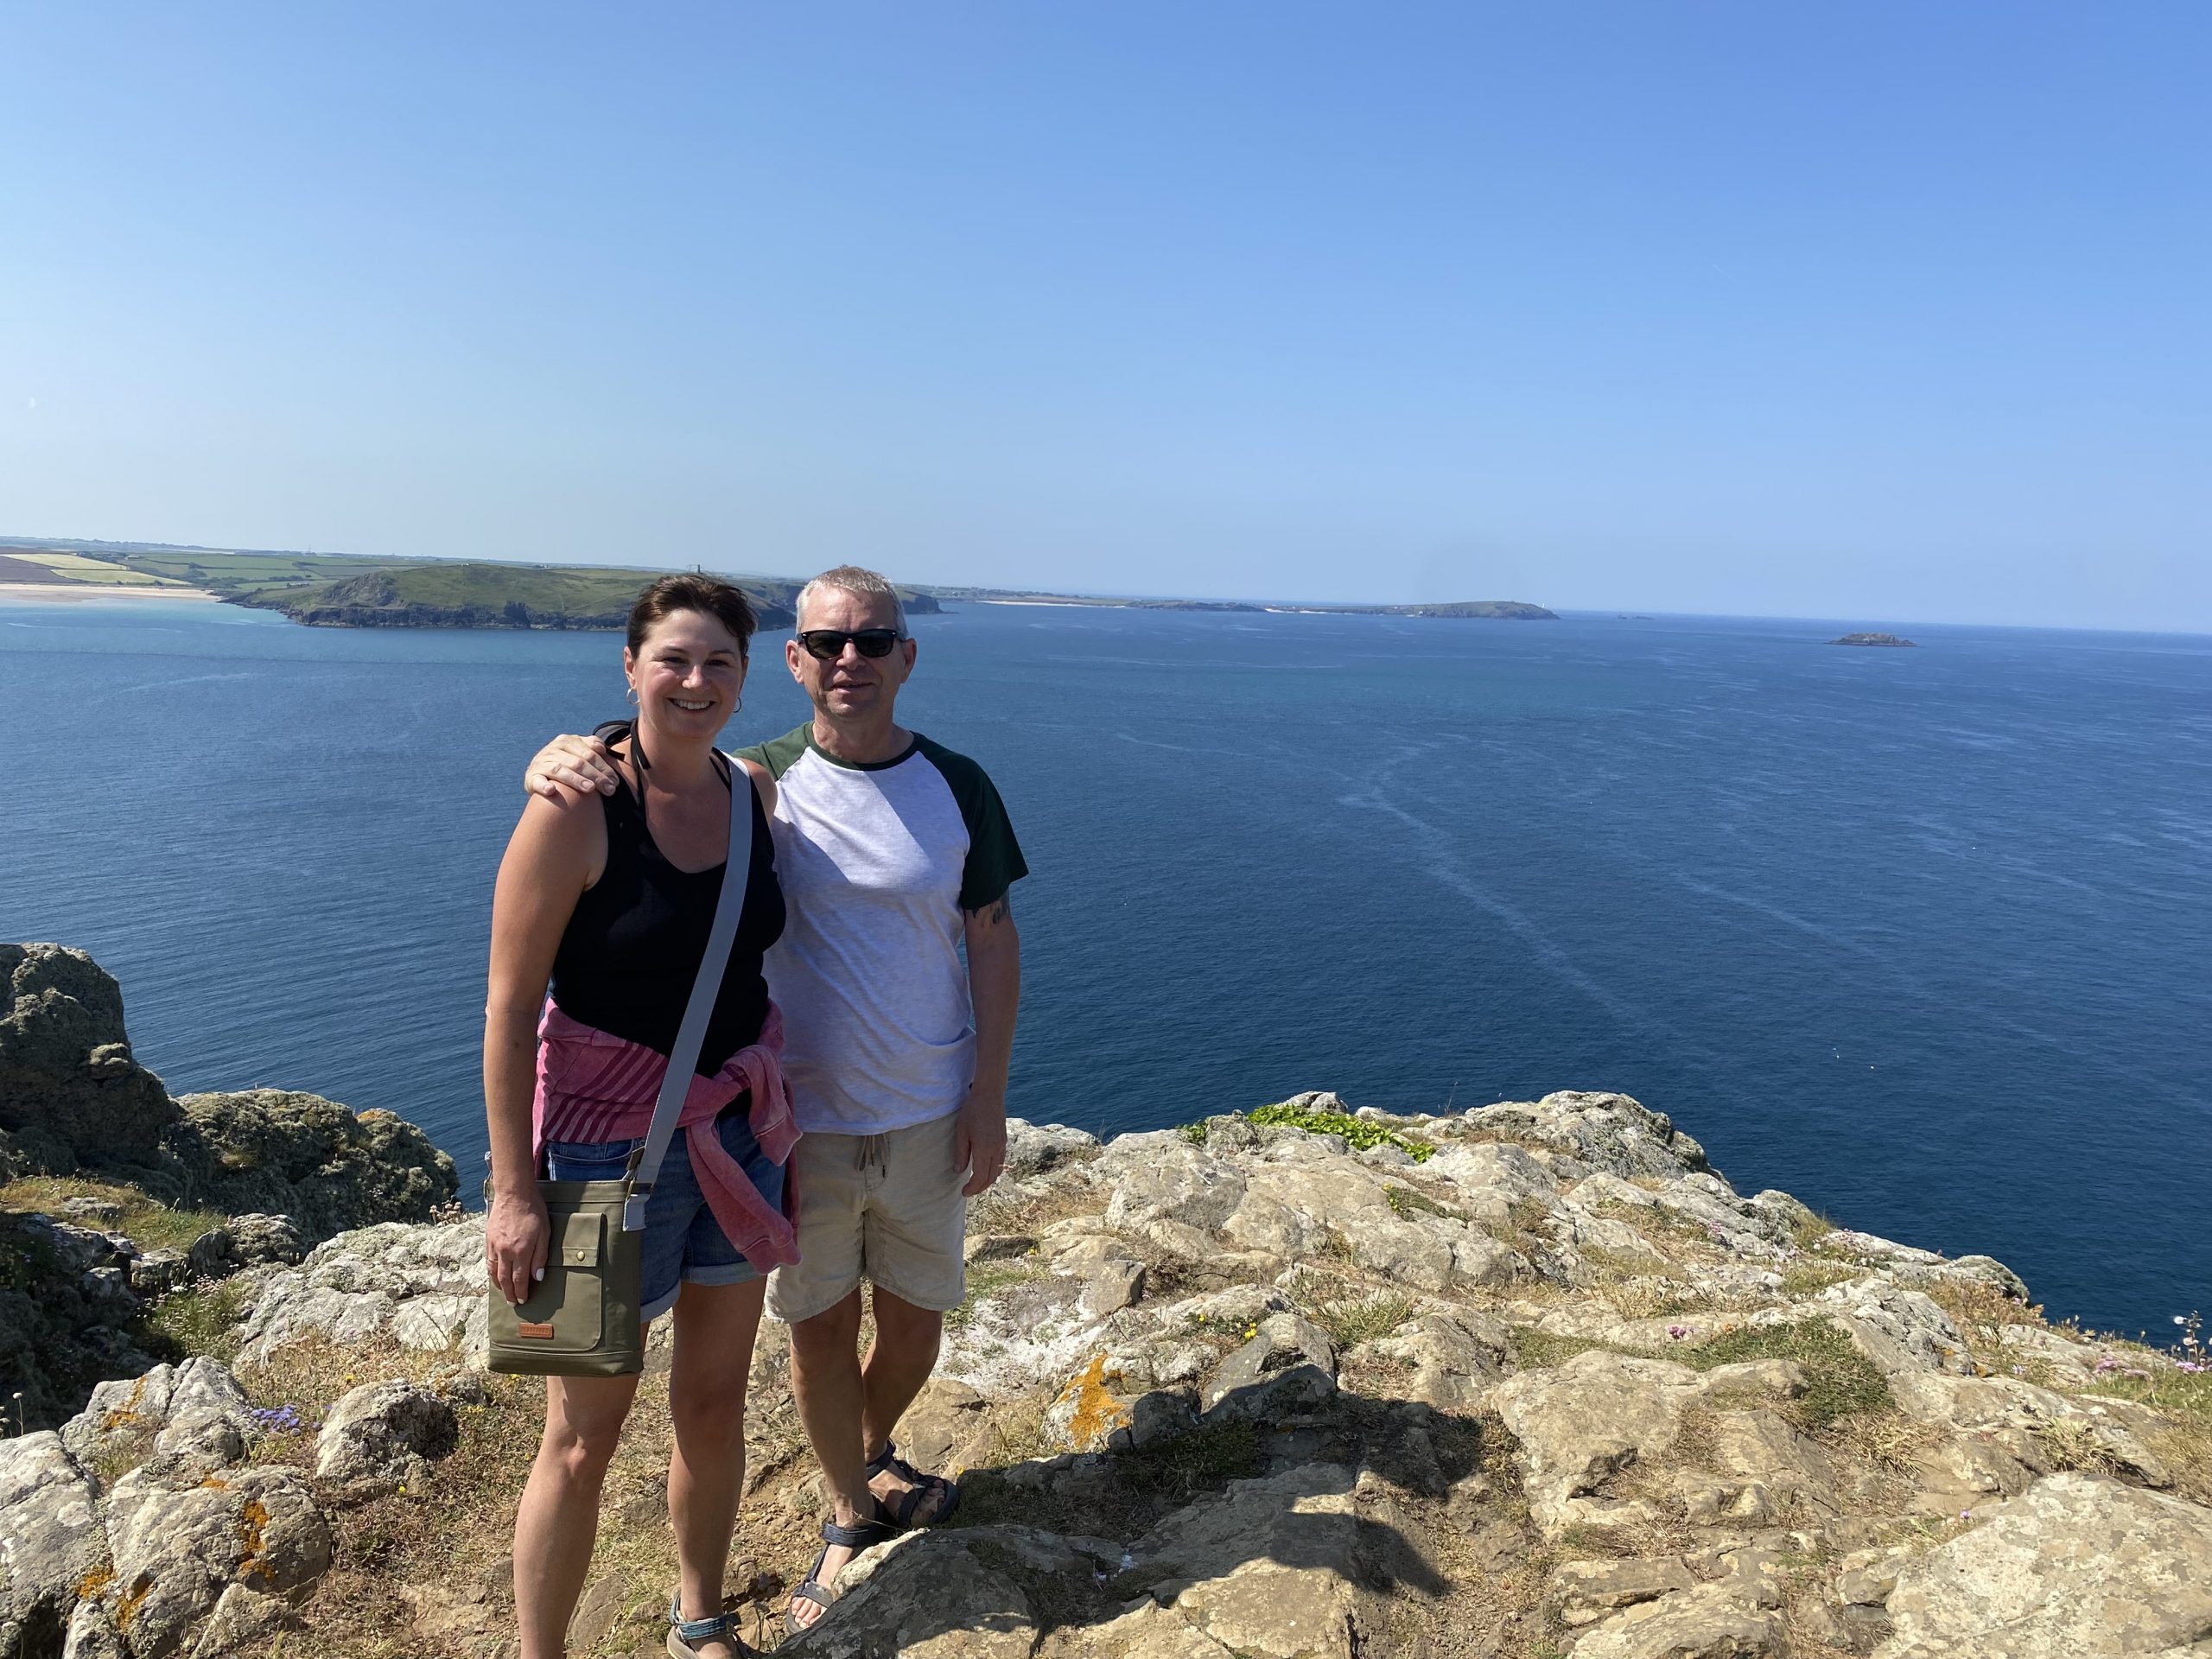 Pat's son Matt with his wife Sarah standing on cliff by the sea during hike